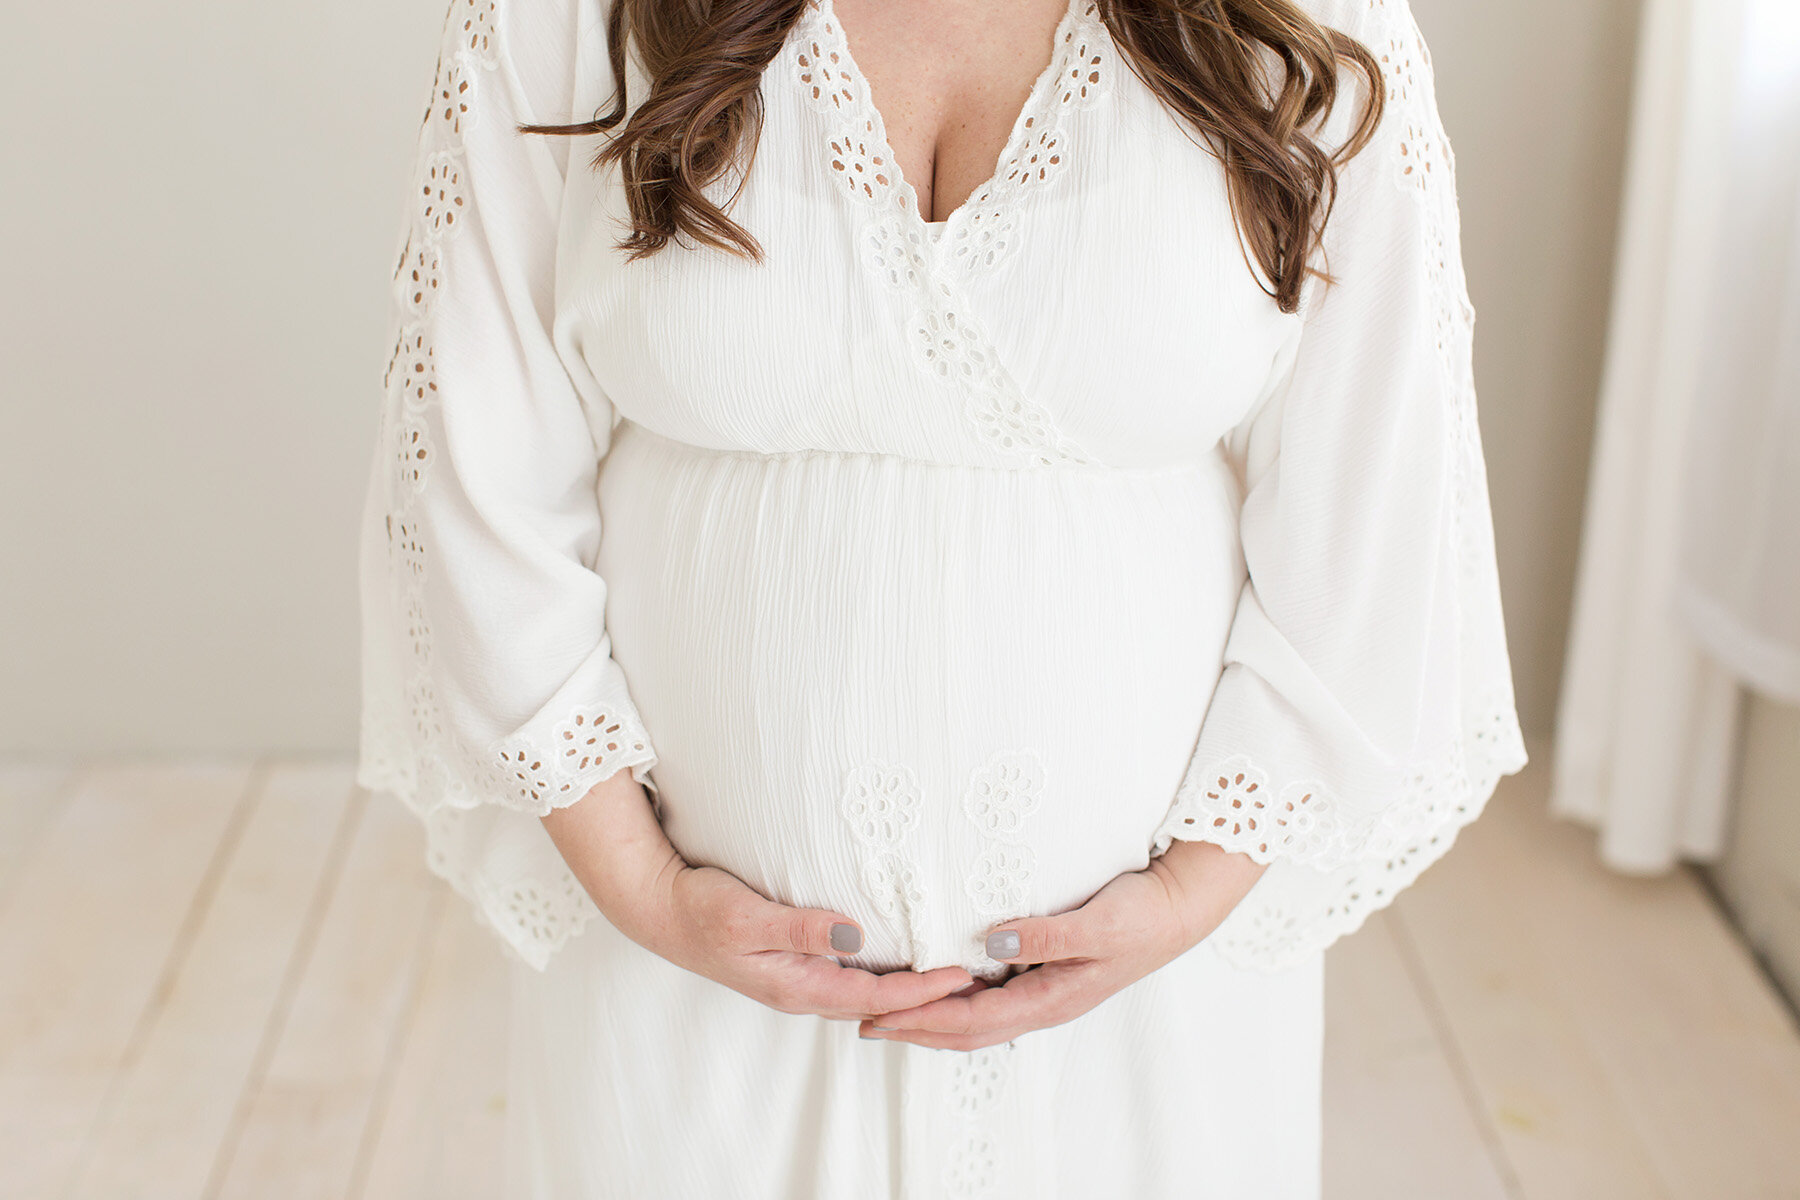 Julie Brock Photography | Louisville Maternity Photographer | Newborn Photographer | Family Photographer | mom wearing Fillyboo dress for maternity photos.jpg